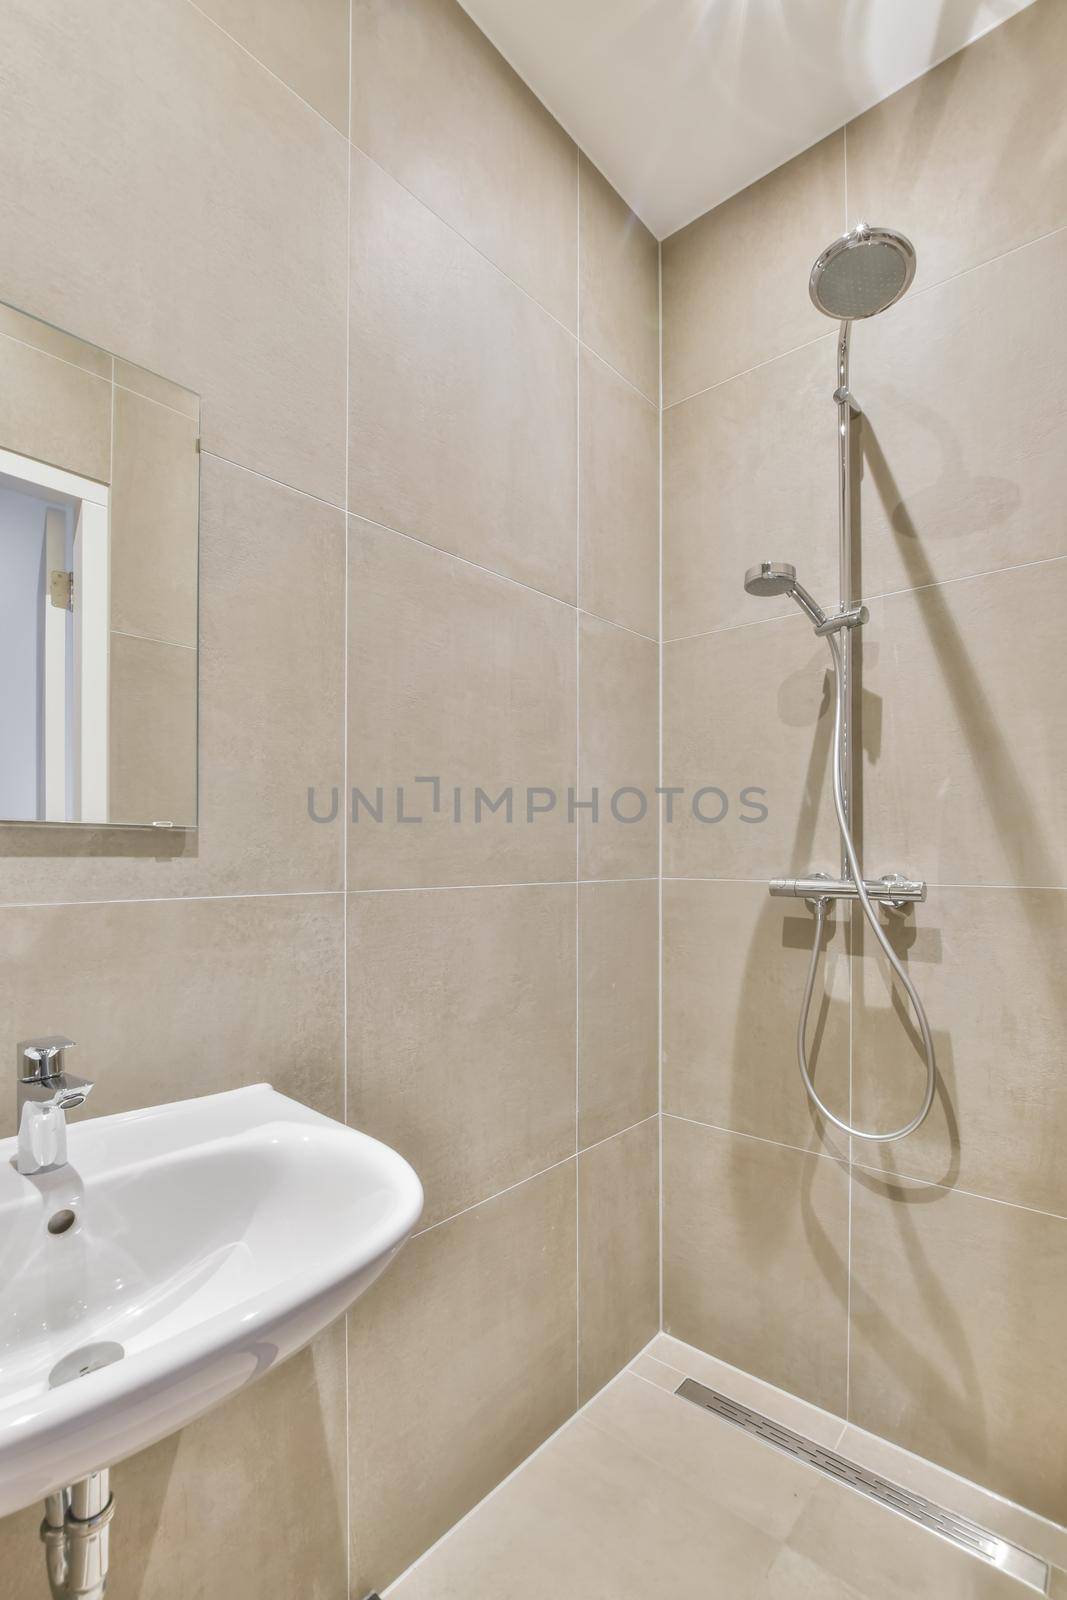 The interior of the bathroom is covered with beige tiles with a shower and sink